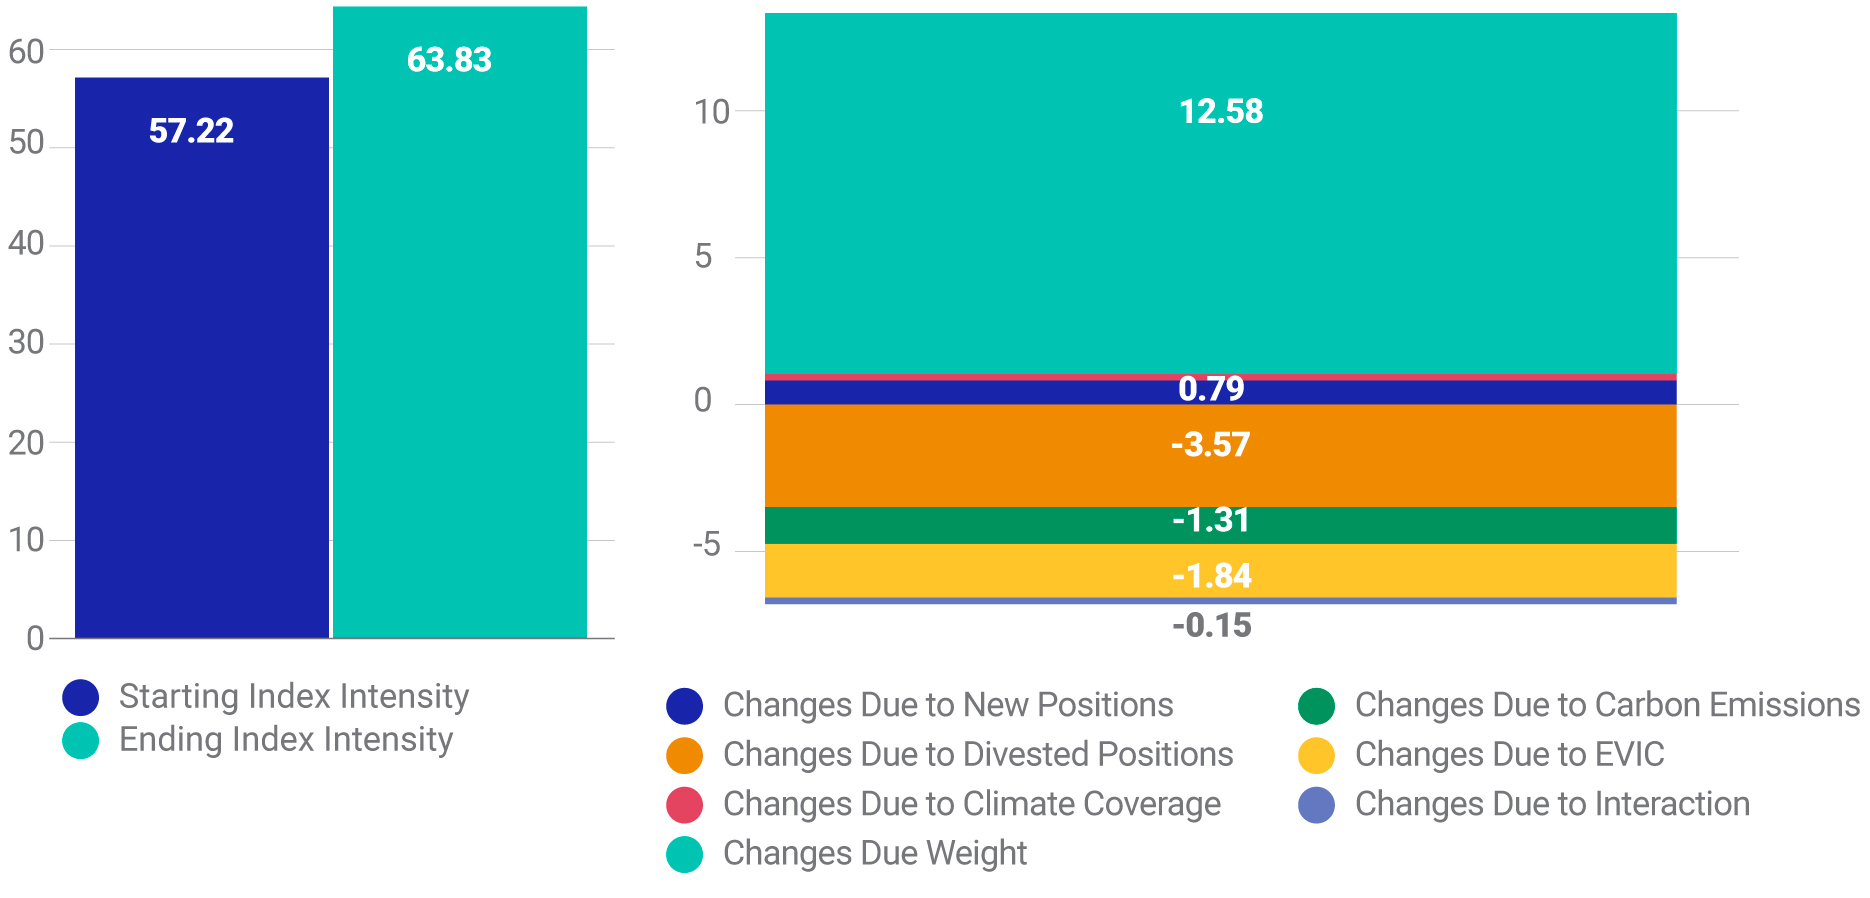 This exhibit breaks down the various drivers of the increase in the MSCI ACWI Investable Market Index’s emission intensity since November 2021. The biggest contributor to the increase was “changes due to index weight” over the period of analysis.